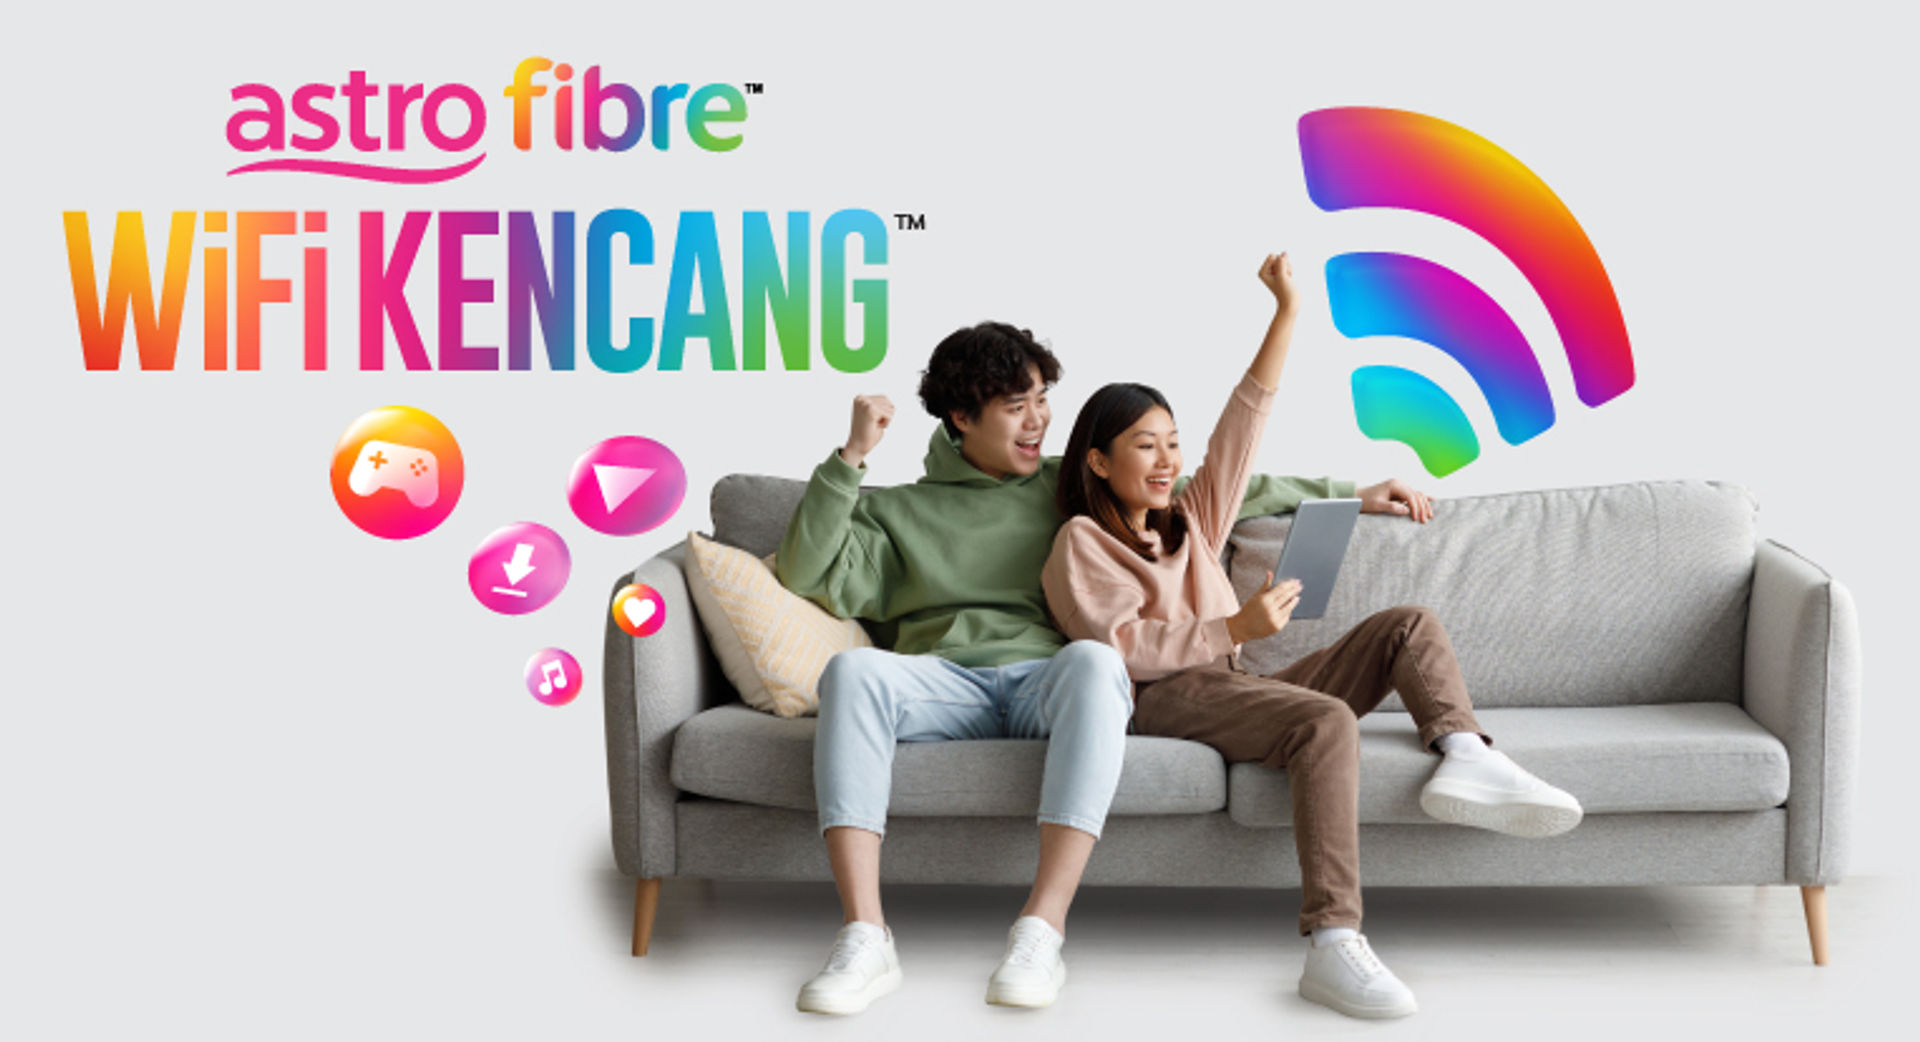 Get WIFI KENCANG™ with Astro Fibre and 1 month FREE!